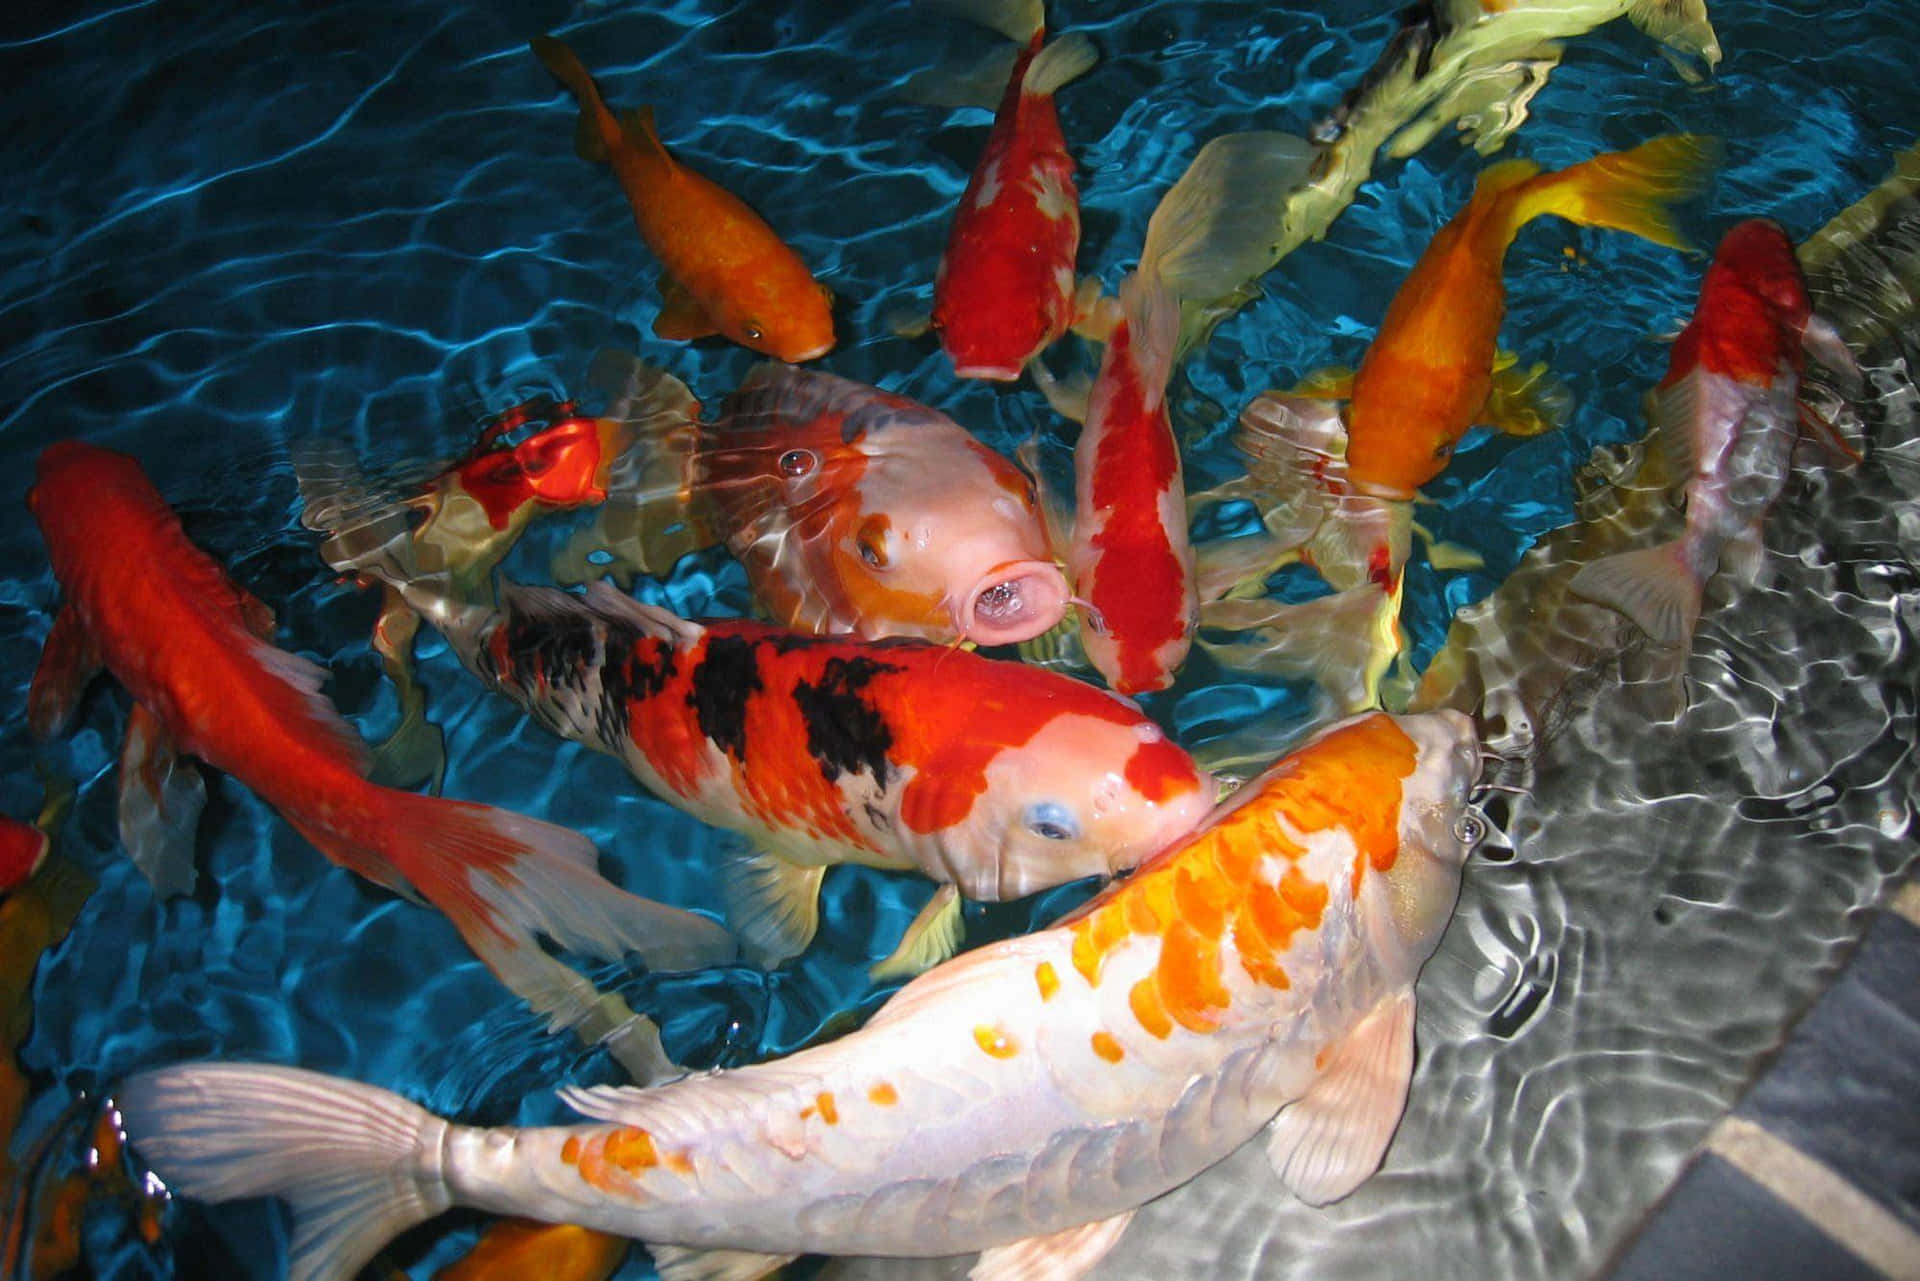 A Graceful Koi Pond - Serenity in motion